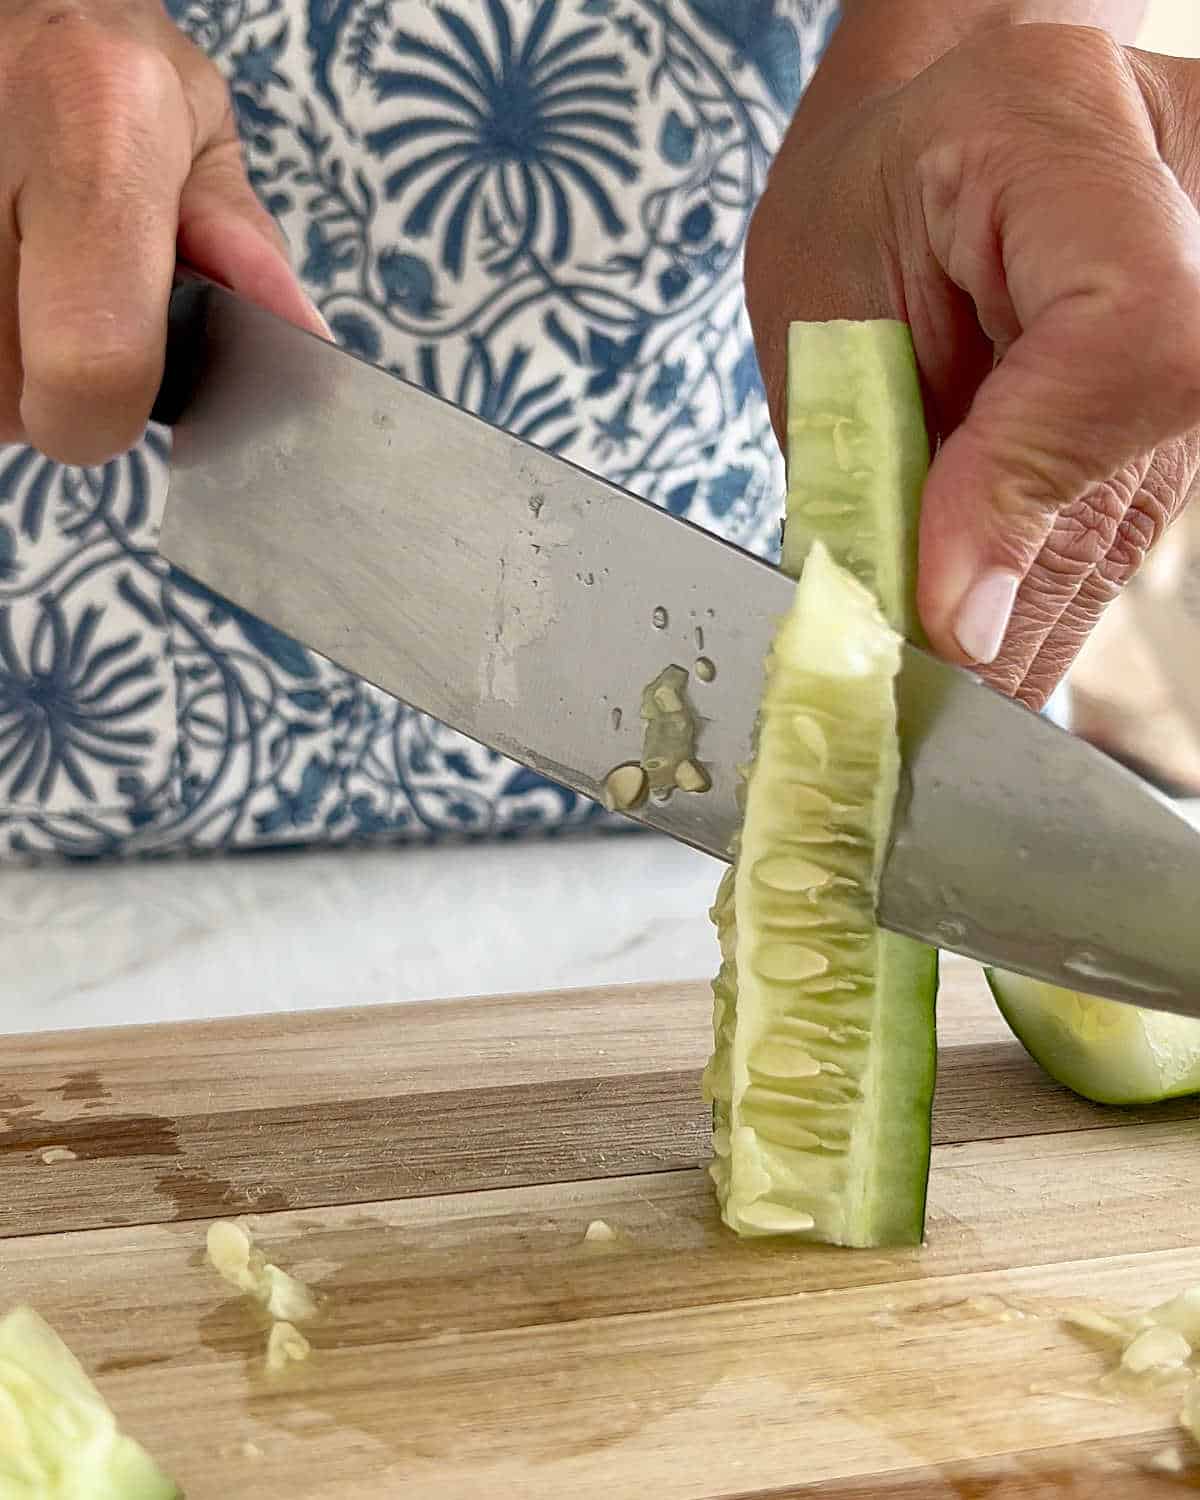 Seeding cucumber quarters with a kitchen knife on a wooden board.